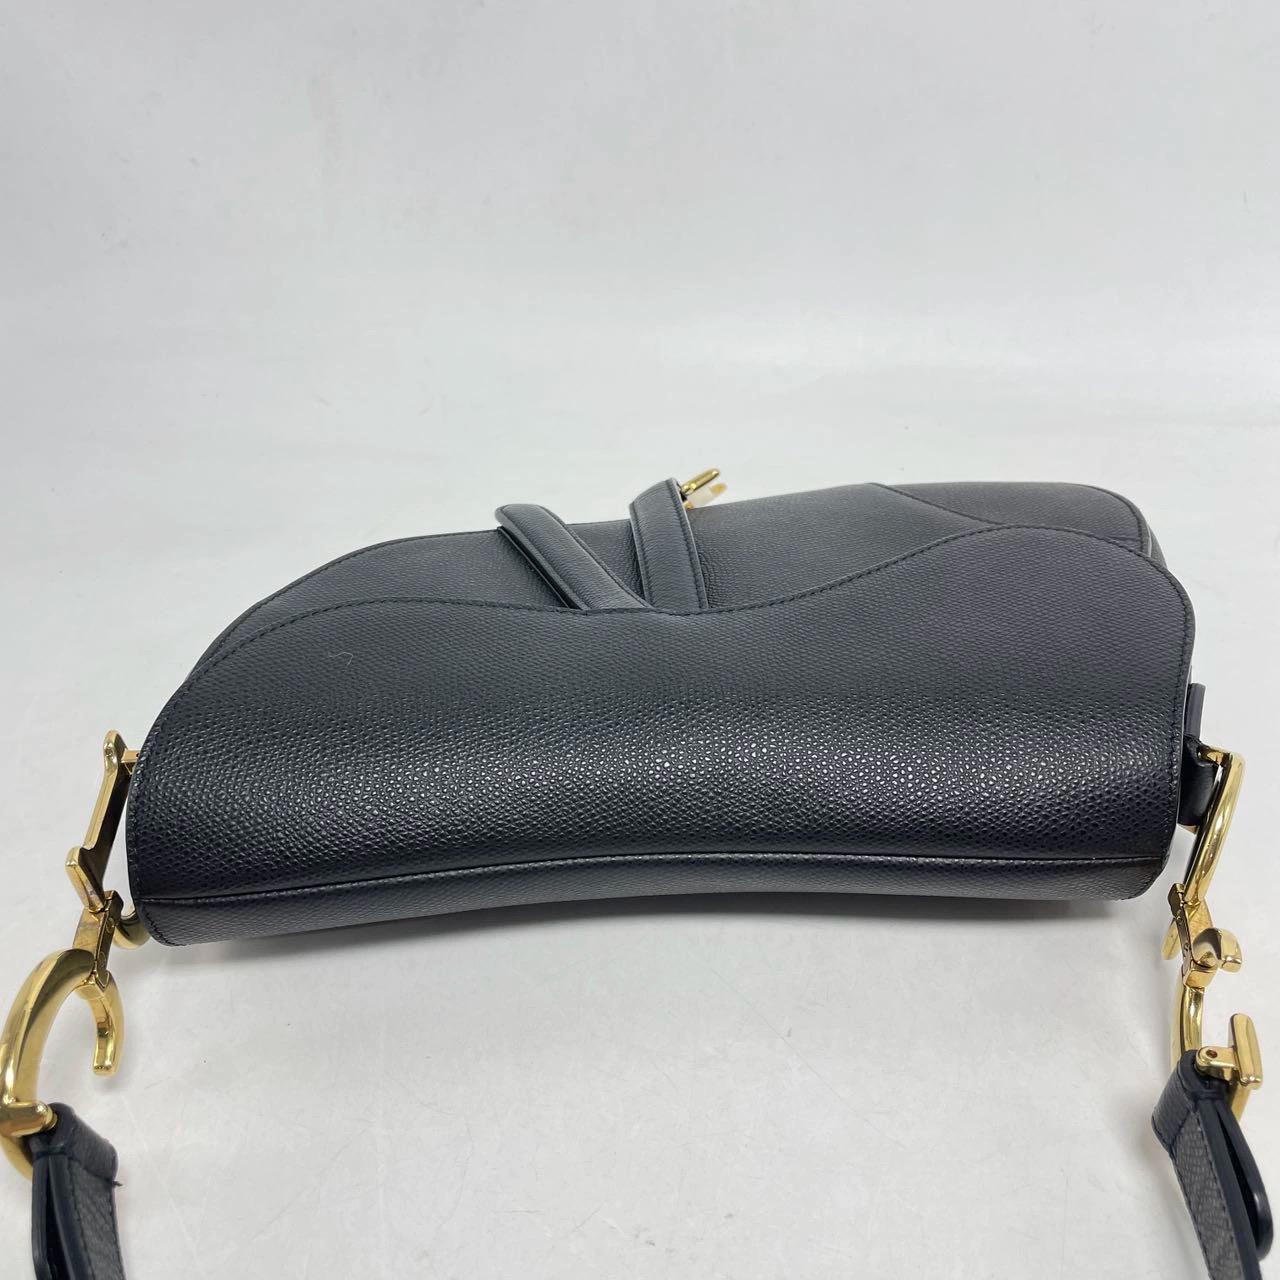 Dior Saddle Black Medium Grained Leather Handbag In Excellent Condition For Sale In AUBERVILLIERS, FR